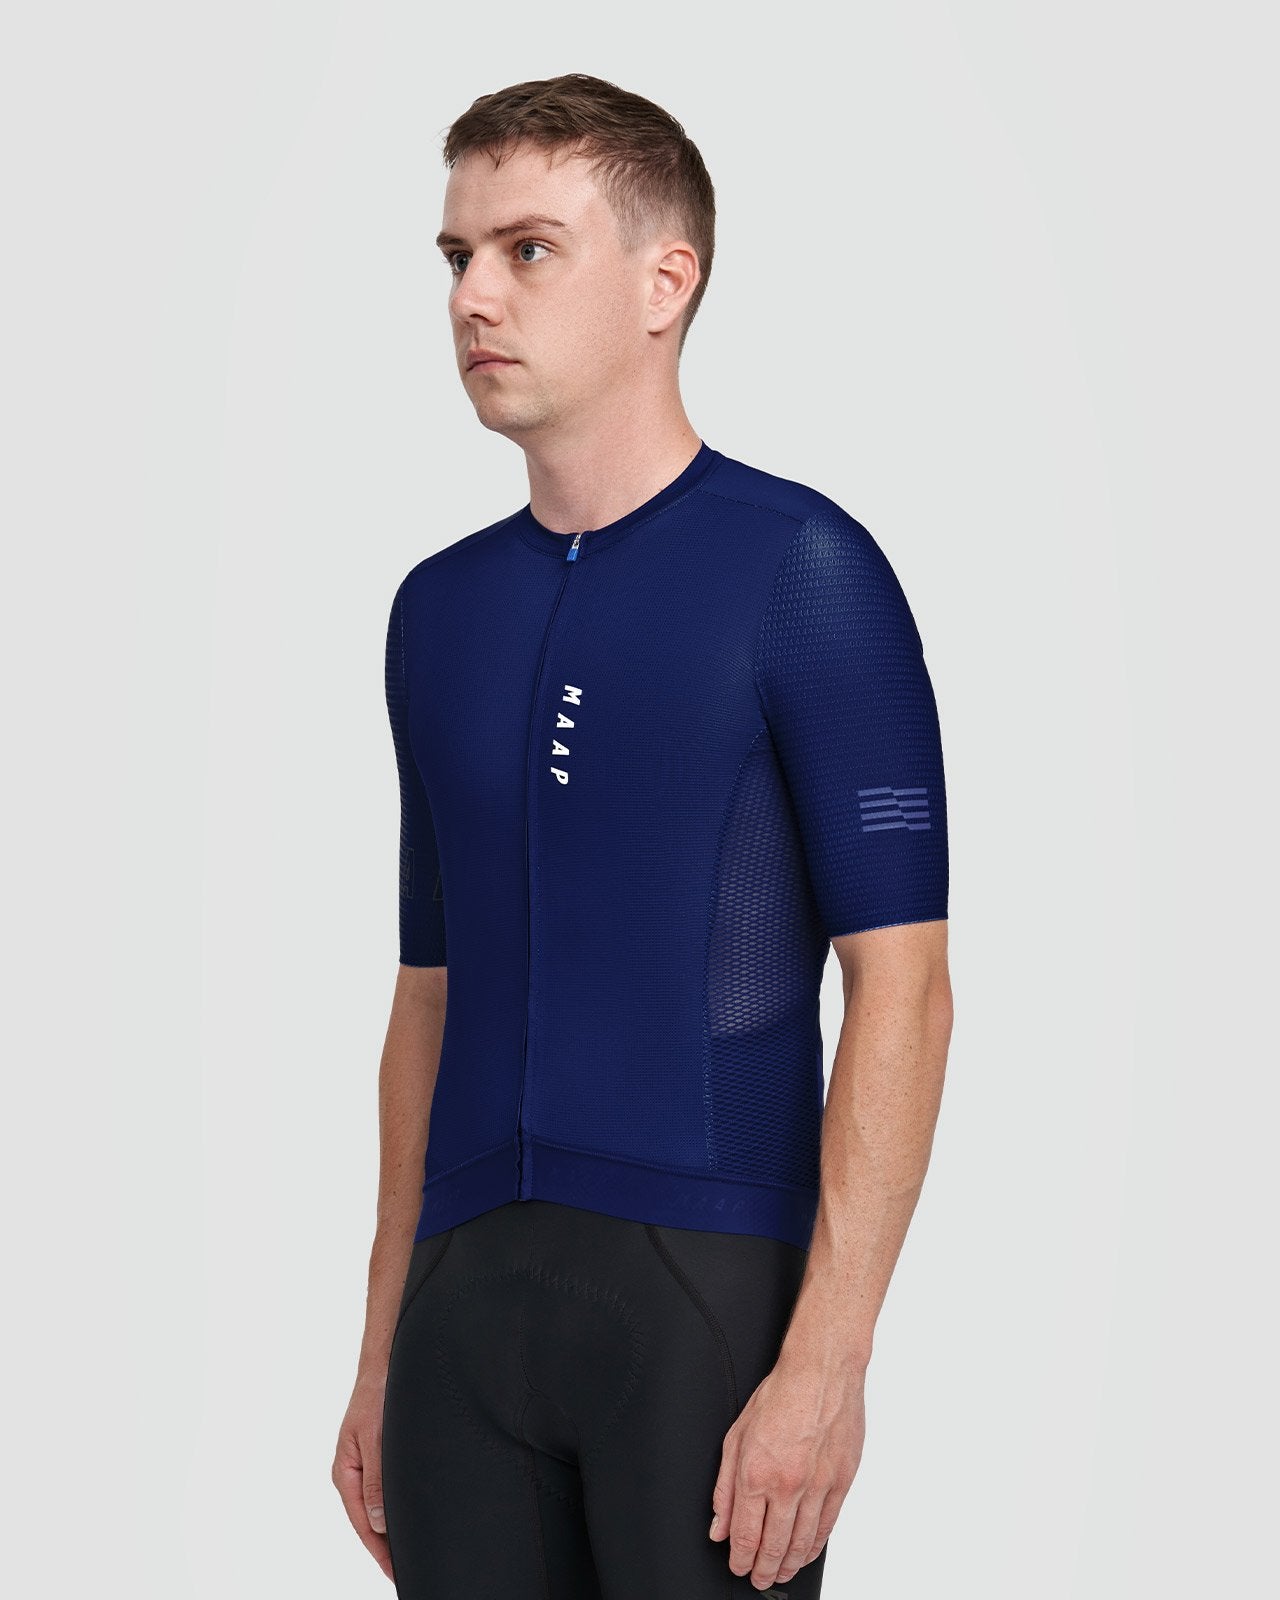 Stealth Race Fit Jersey - Ink